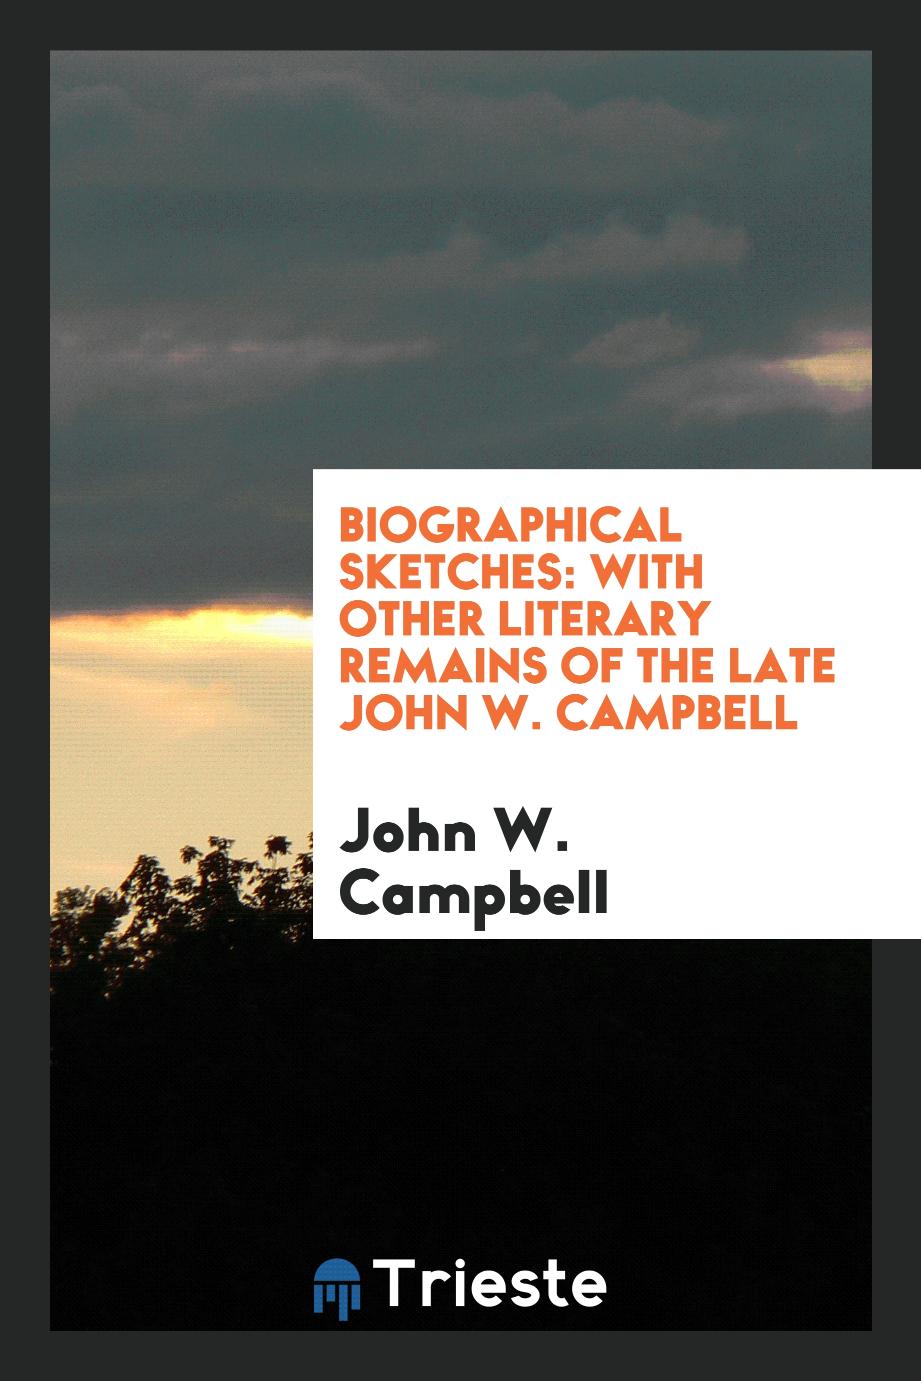 Biographical Sketches: With Other Literary Remains of the Late John W. Campbell